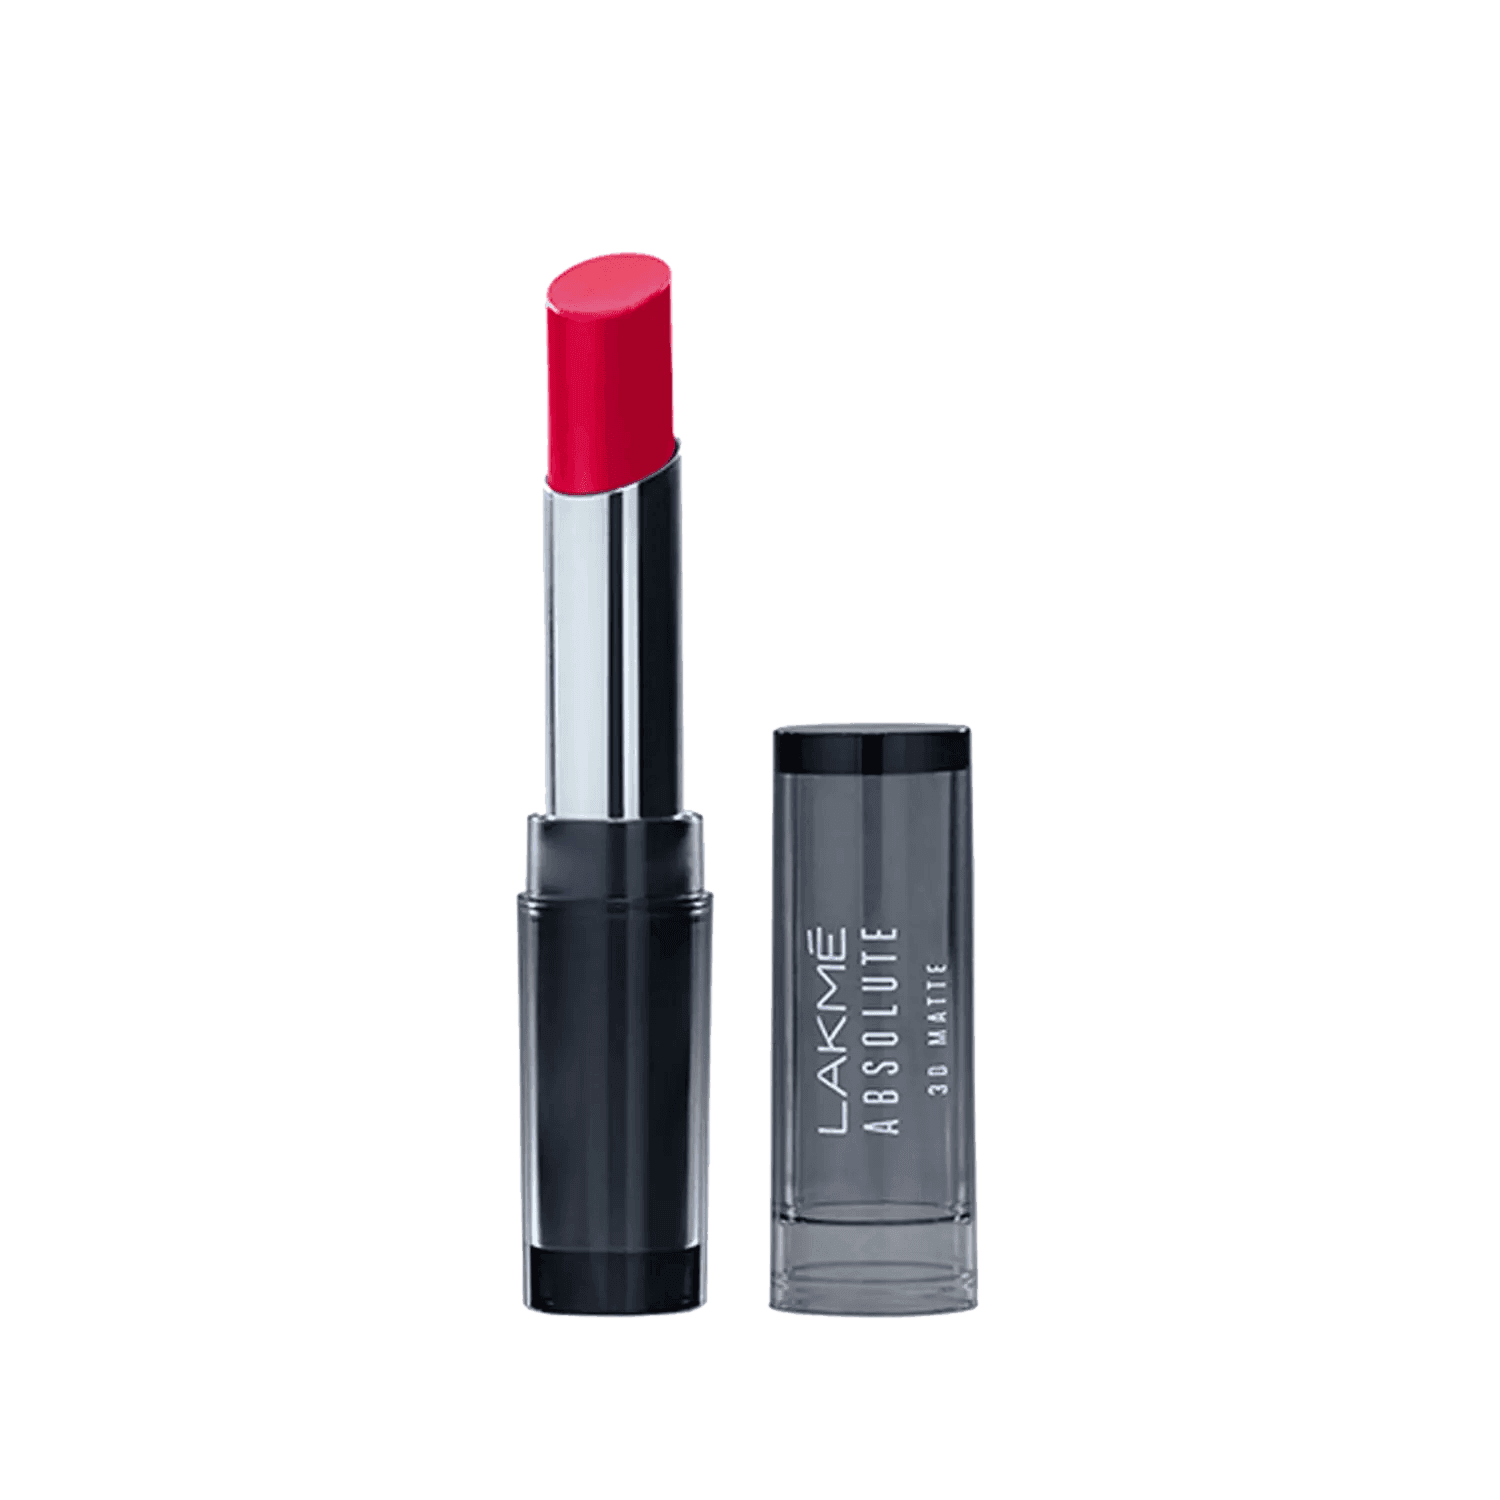 lakme absolute 3d lipstick - romeo red (3.6g)